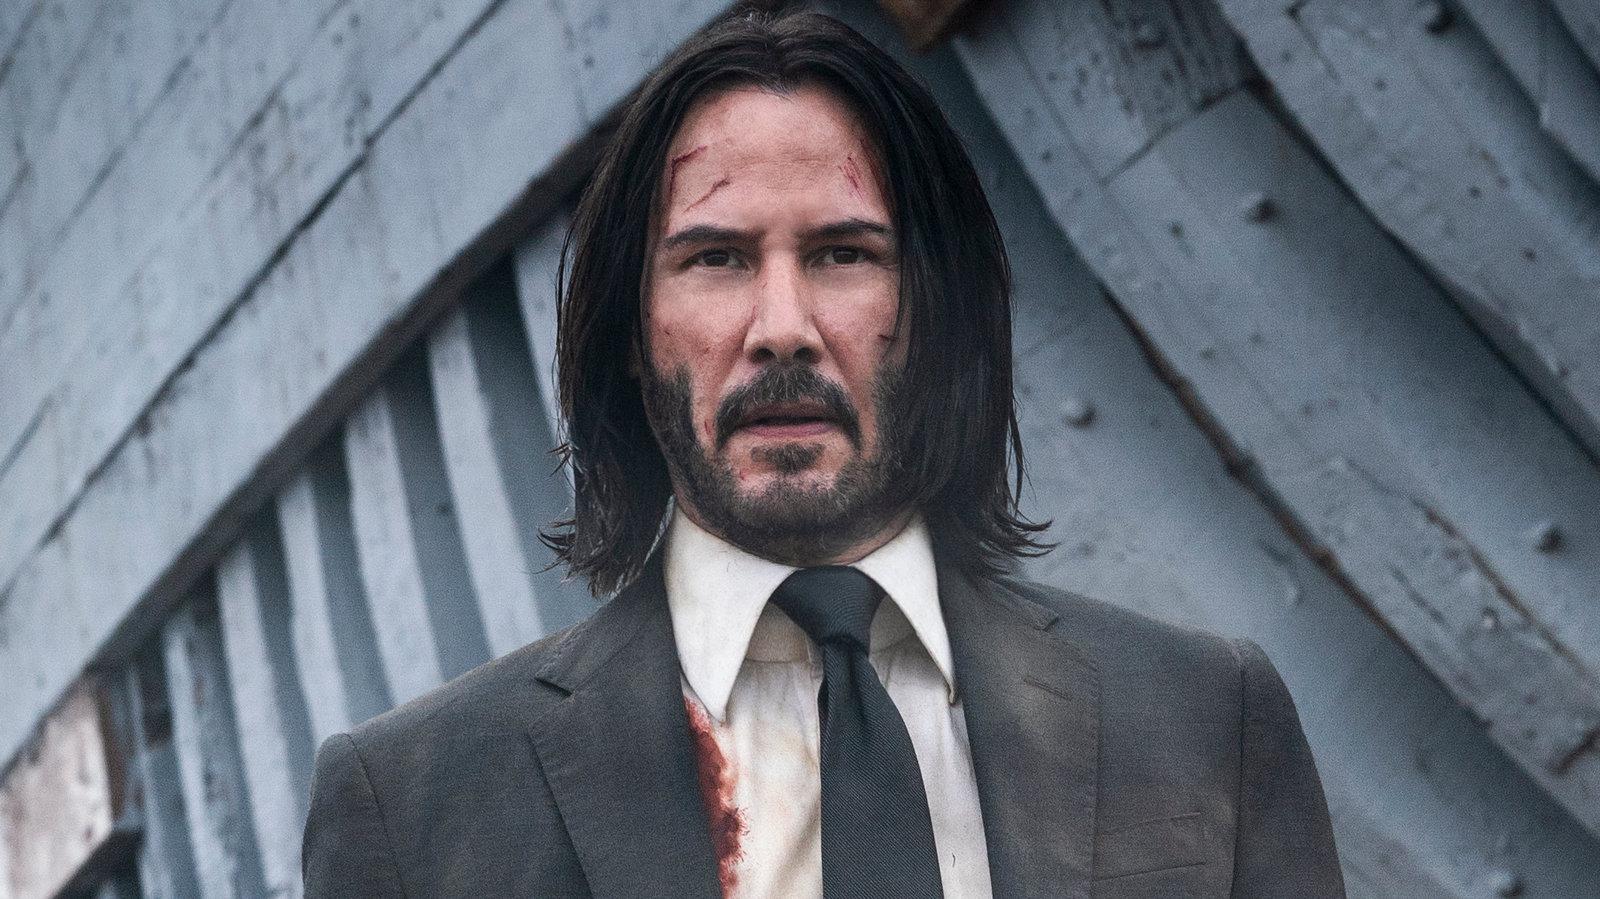 The director Chad Stahelski narrates a sequence from “John Wick: Chapter 3